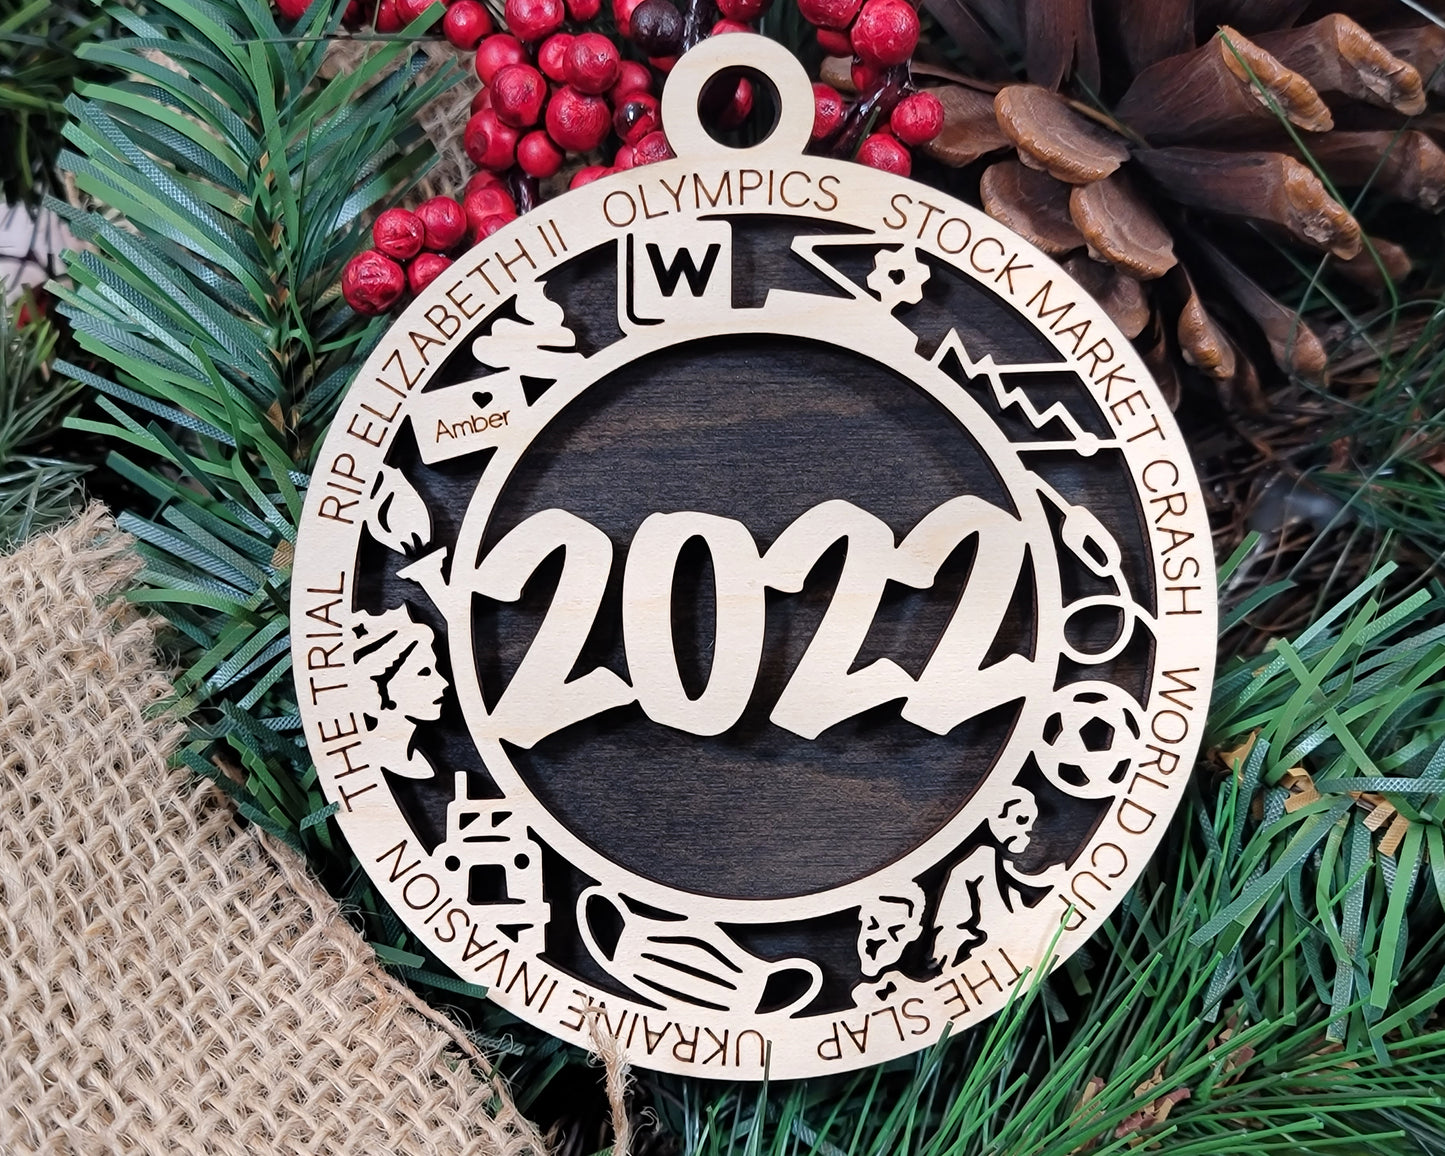 2022 Themed Ornaments